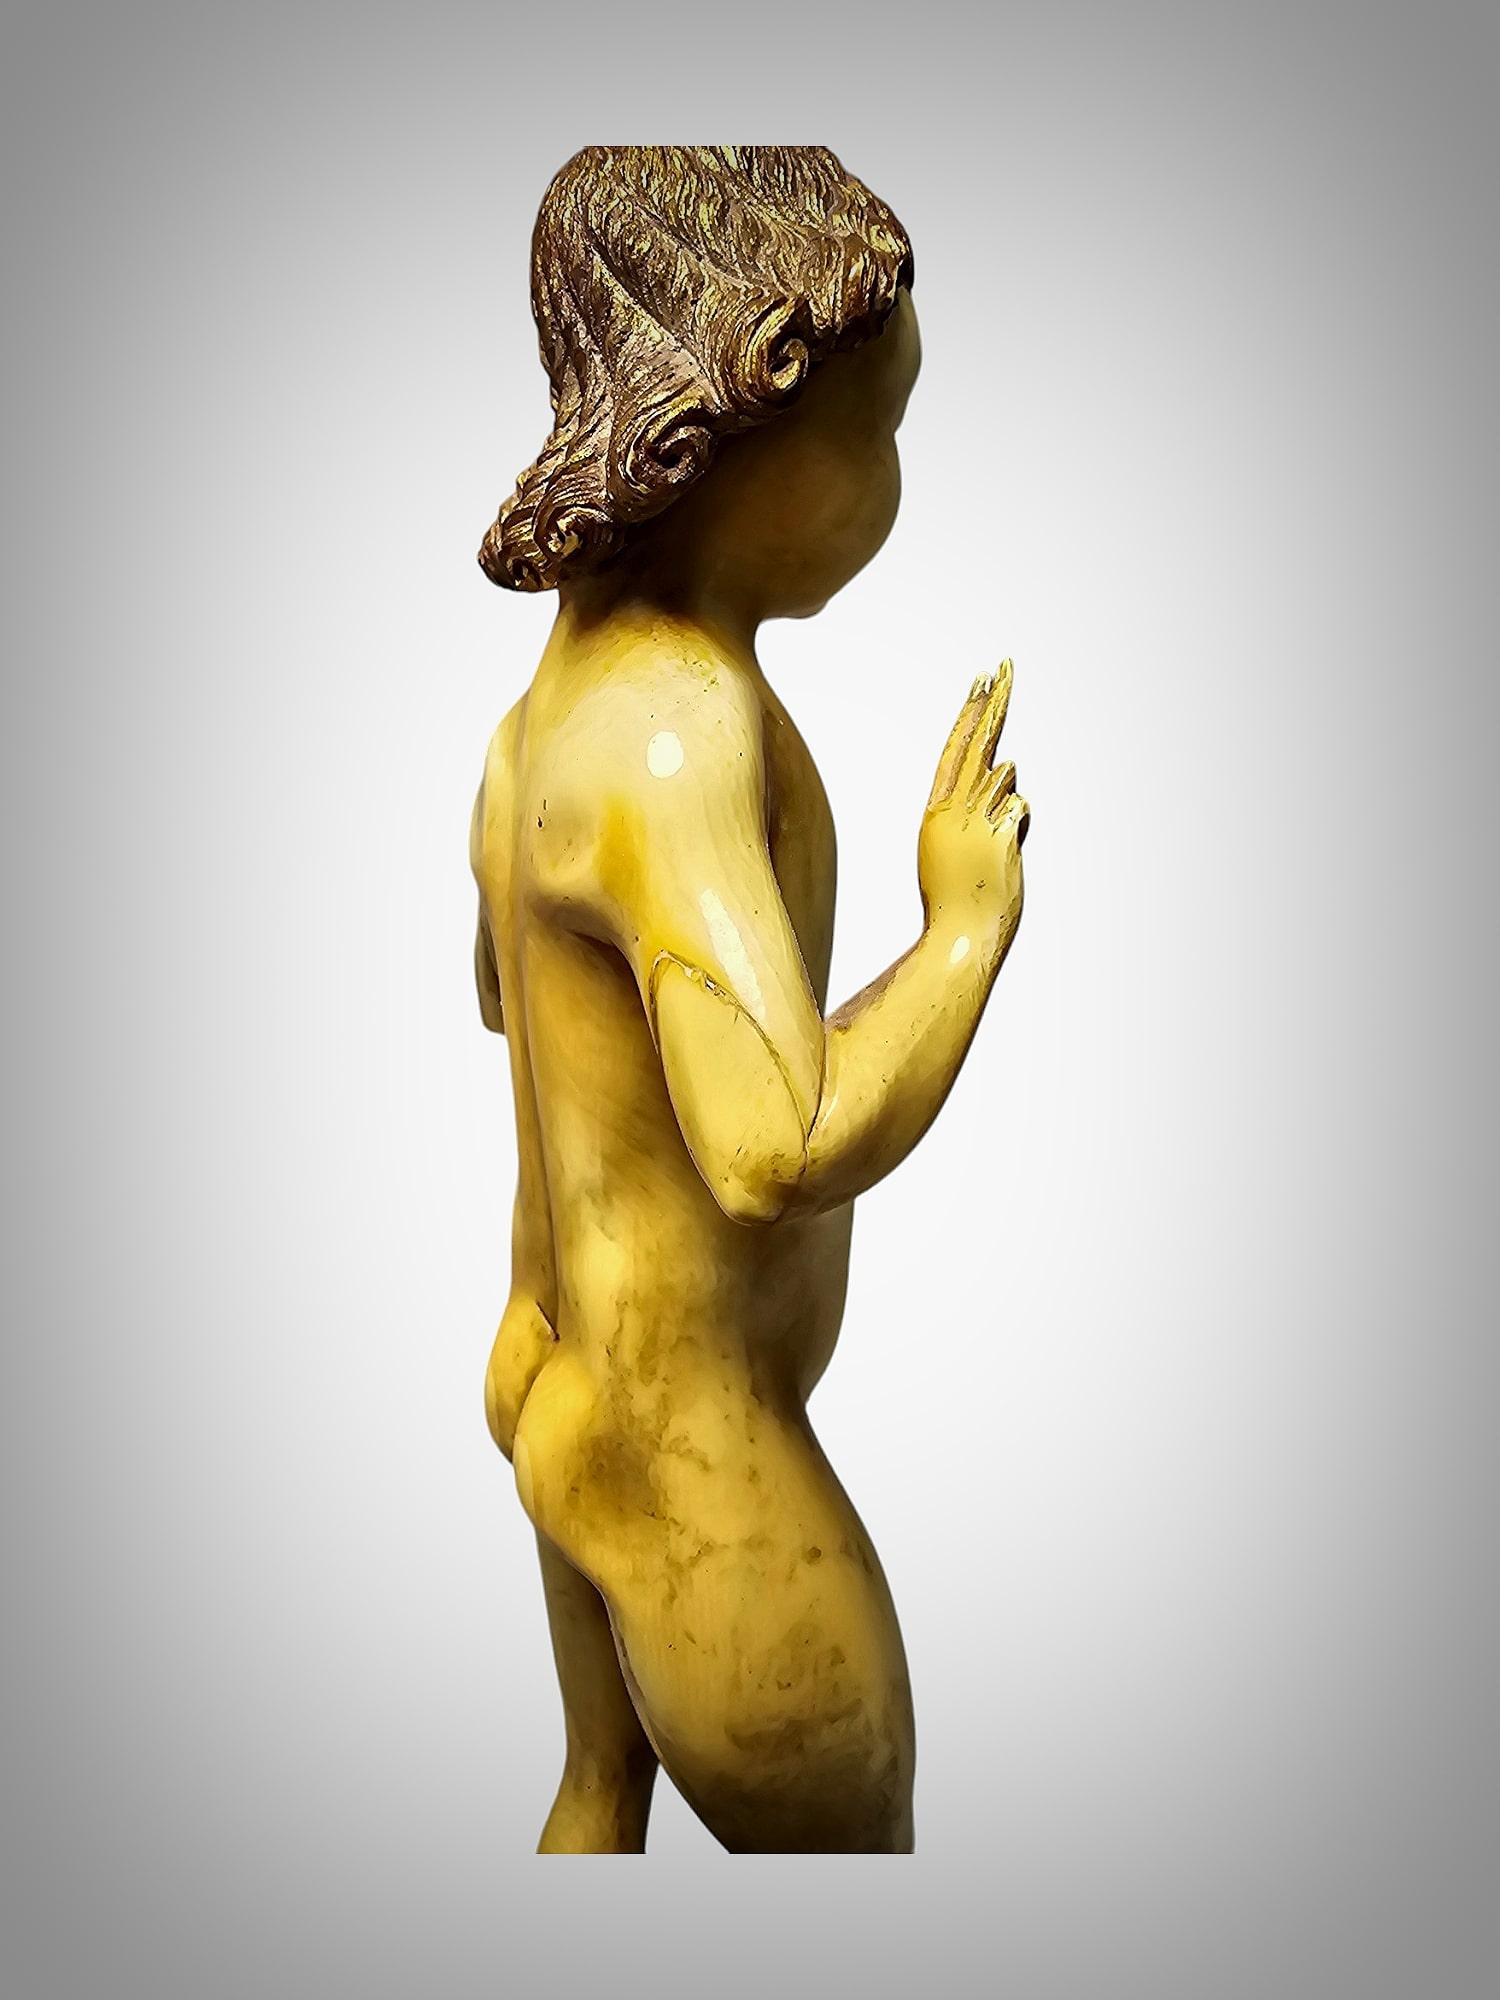 Sculpture of the Infant Jesus as Salvator Mundi - School of Mechelen, 15th-16th  For Sale 6